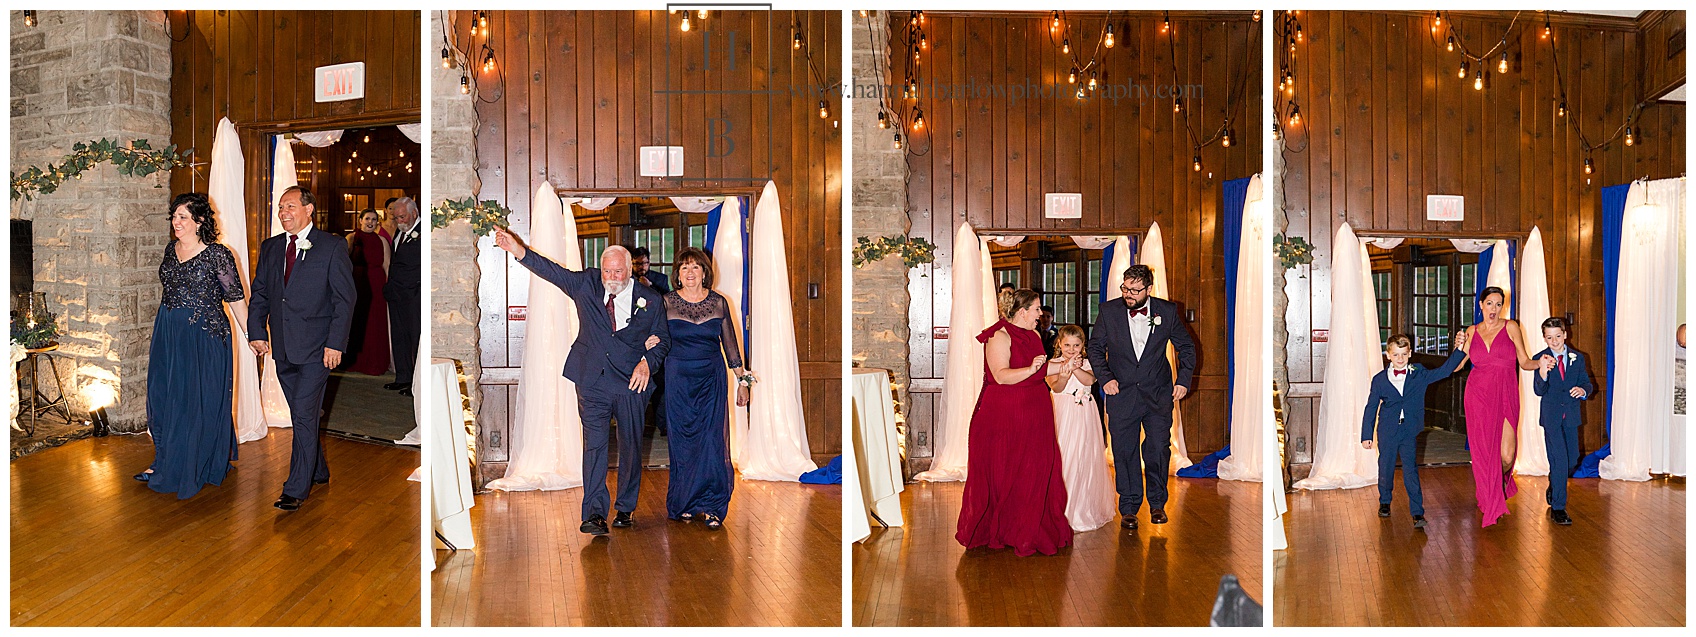 Bridal Party Being Announced at Oglebay Pine Room